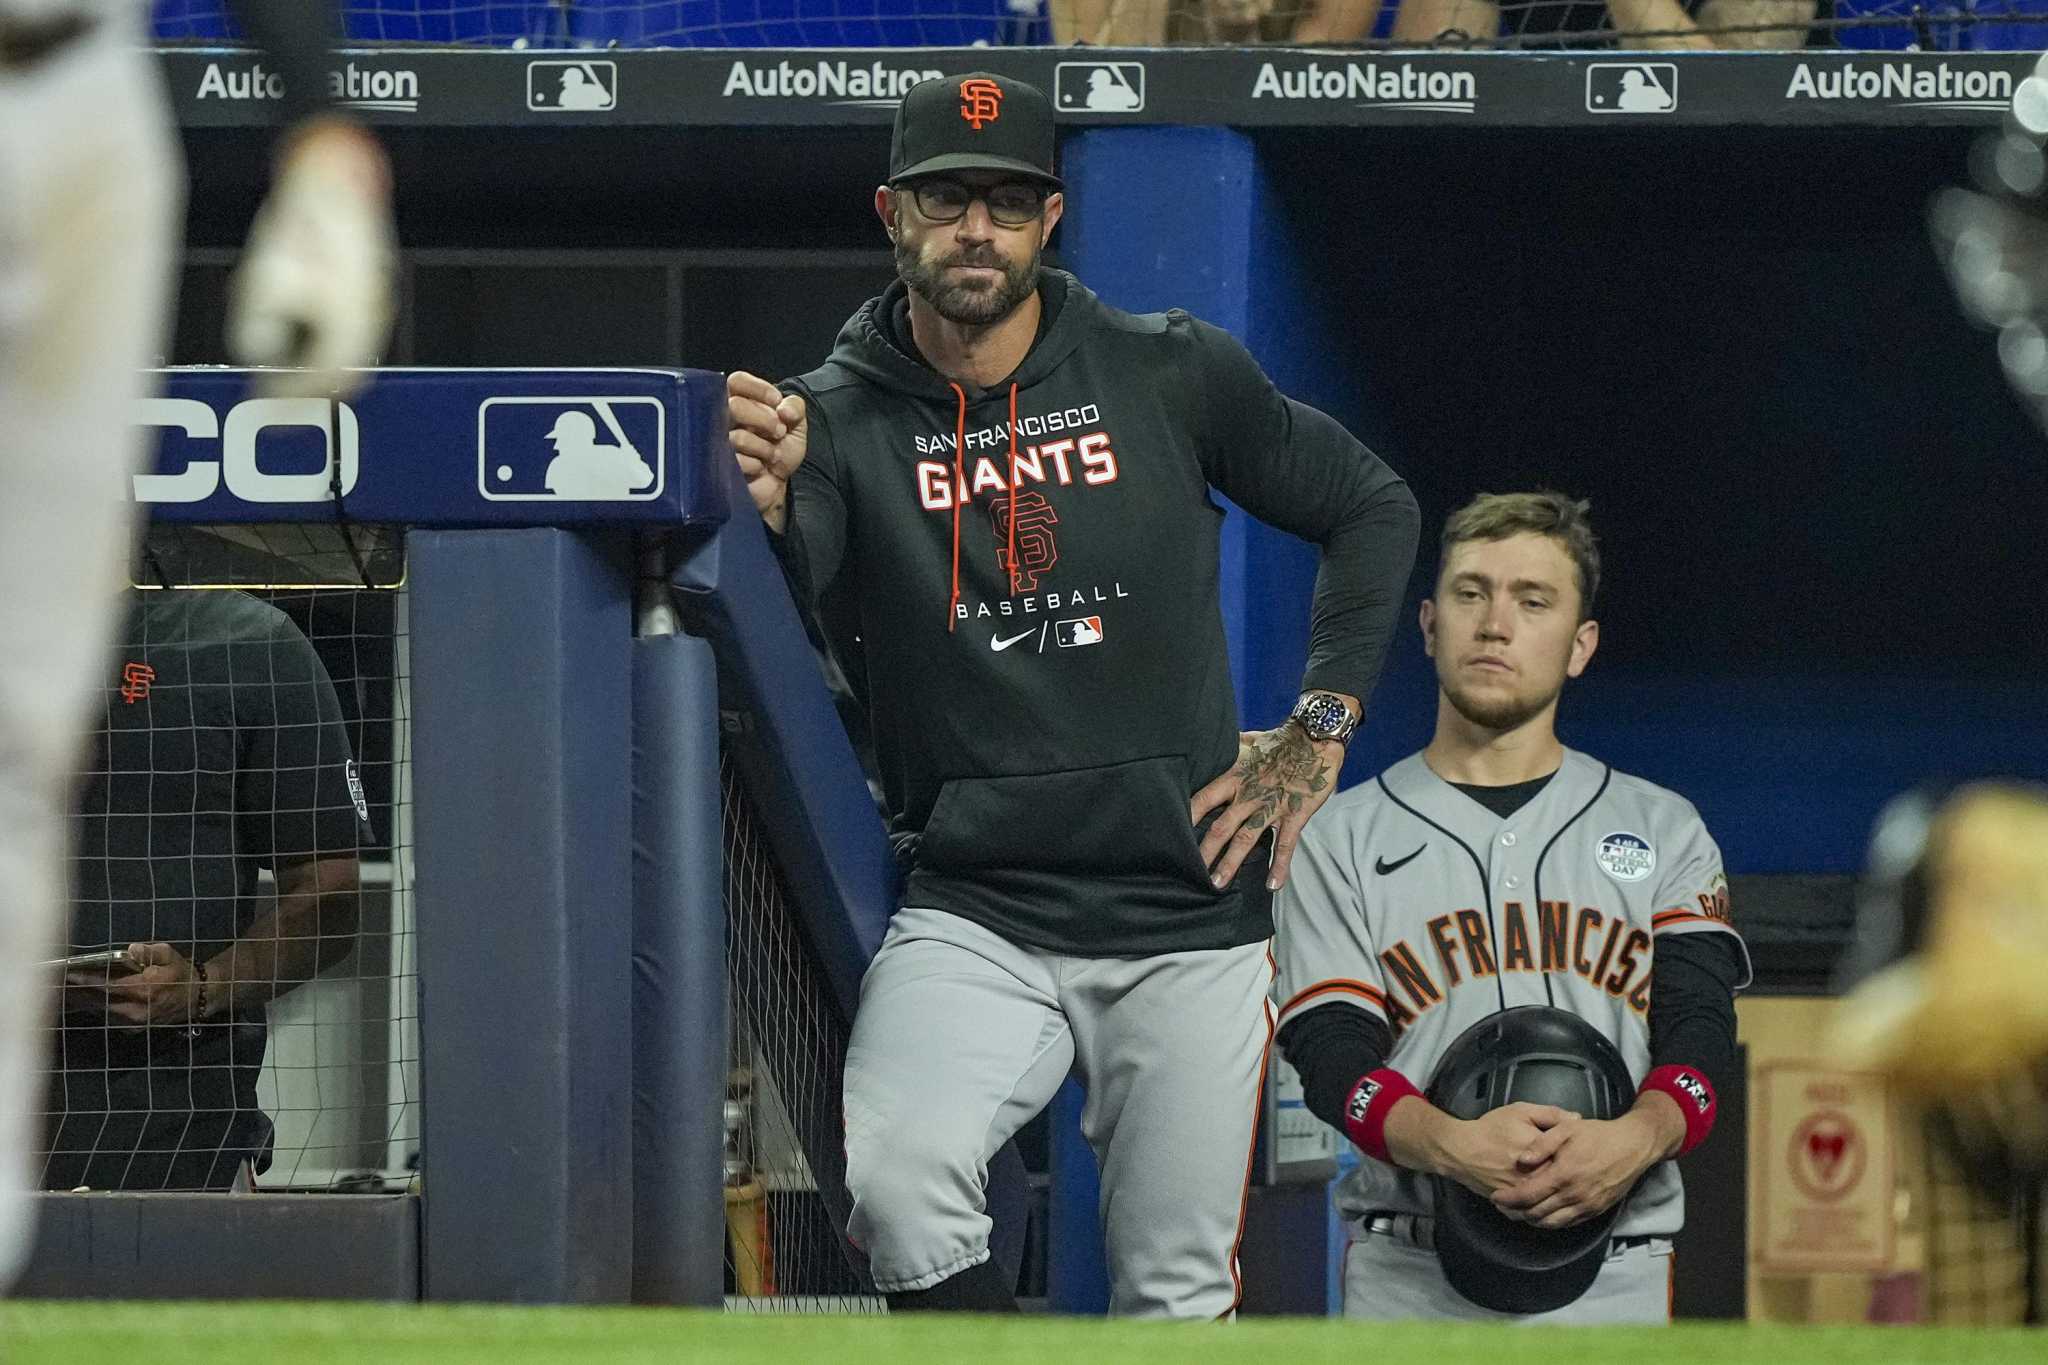 Giants skipper Kapler serving 1-game suspension for returning to dugout  after being ejected Florida & Sun News - Bally Sports